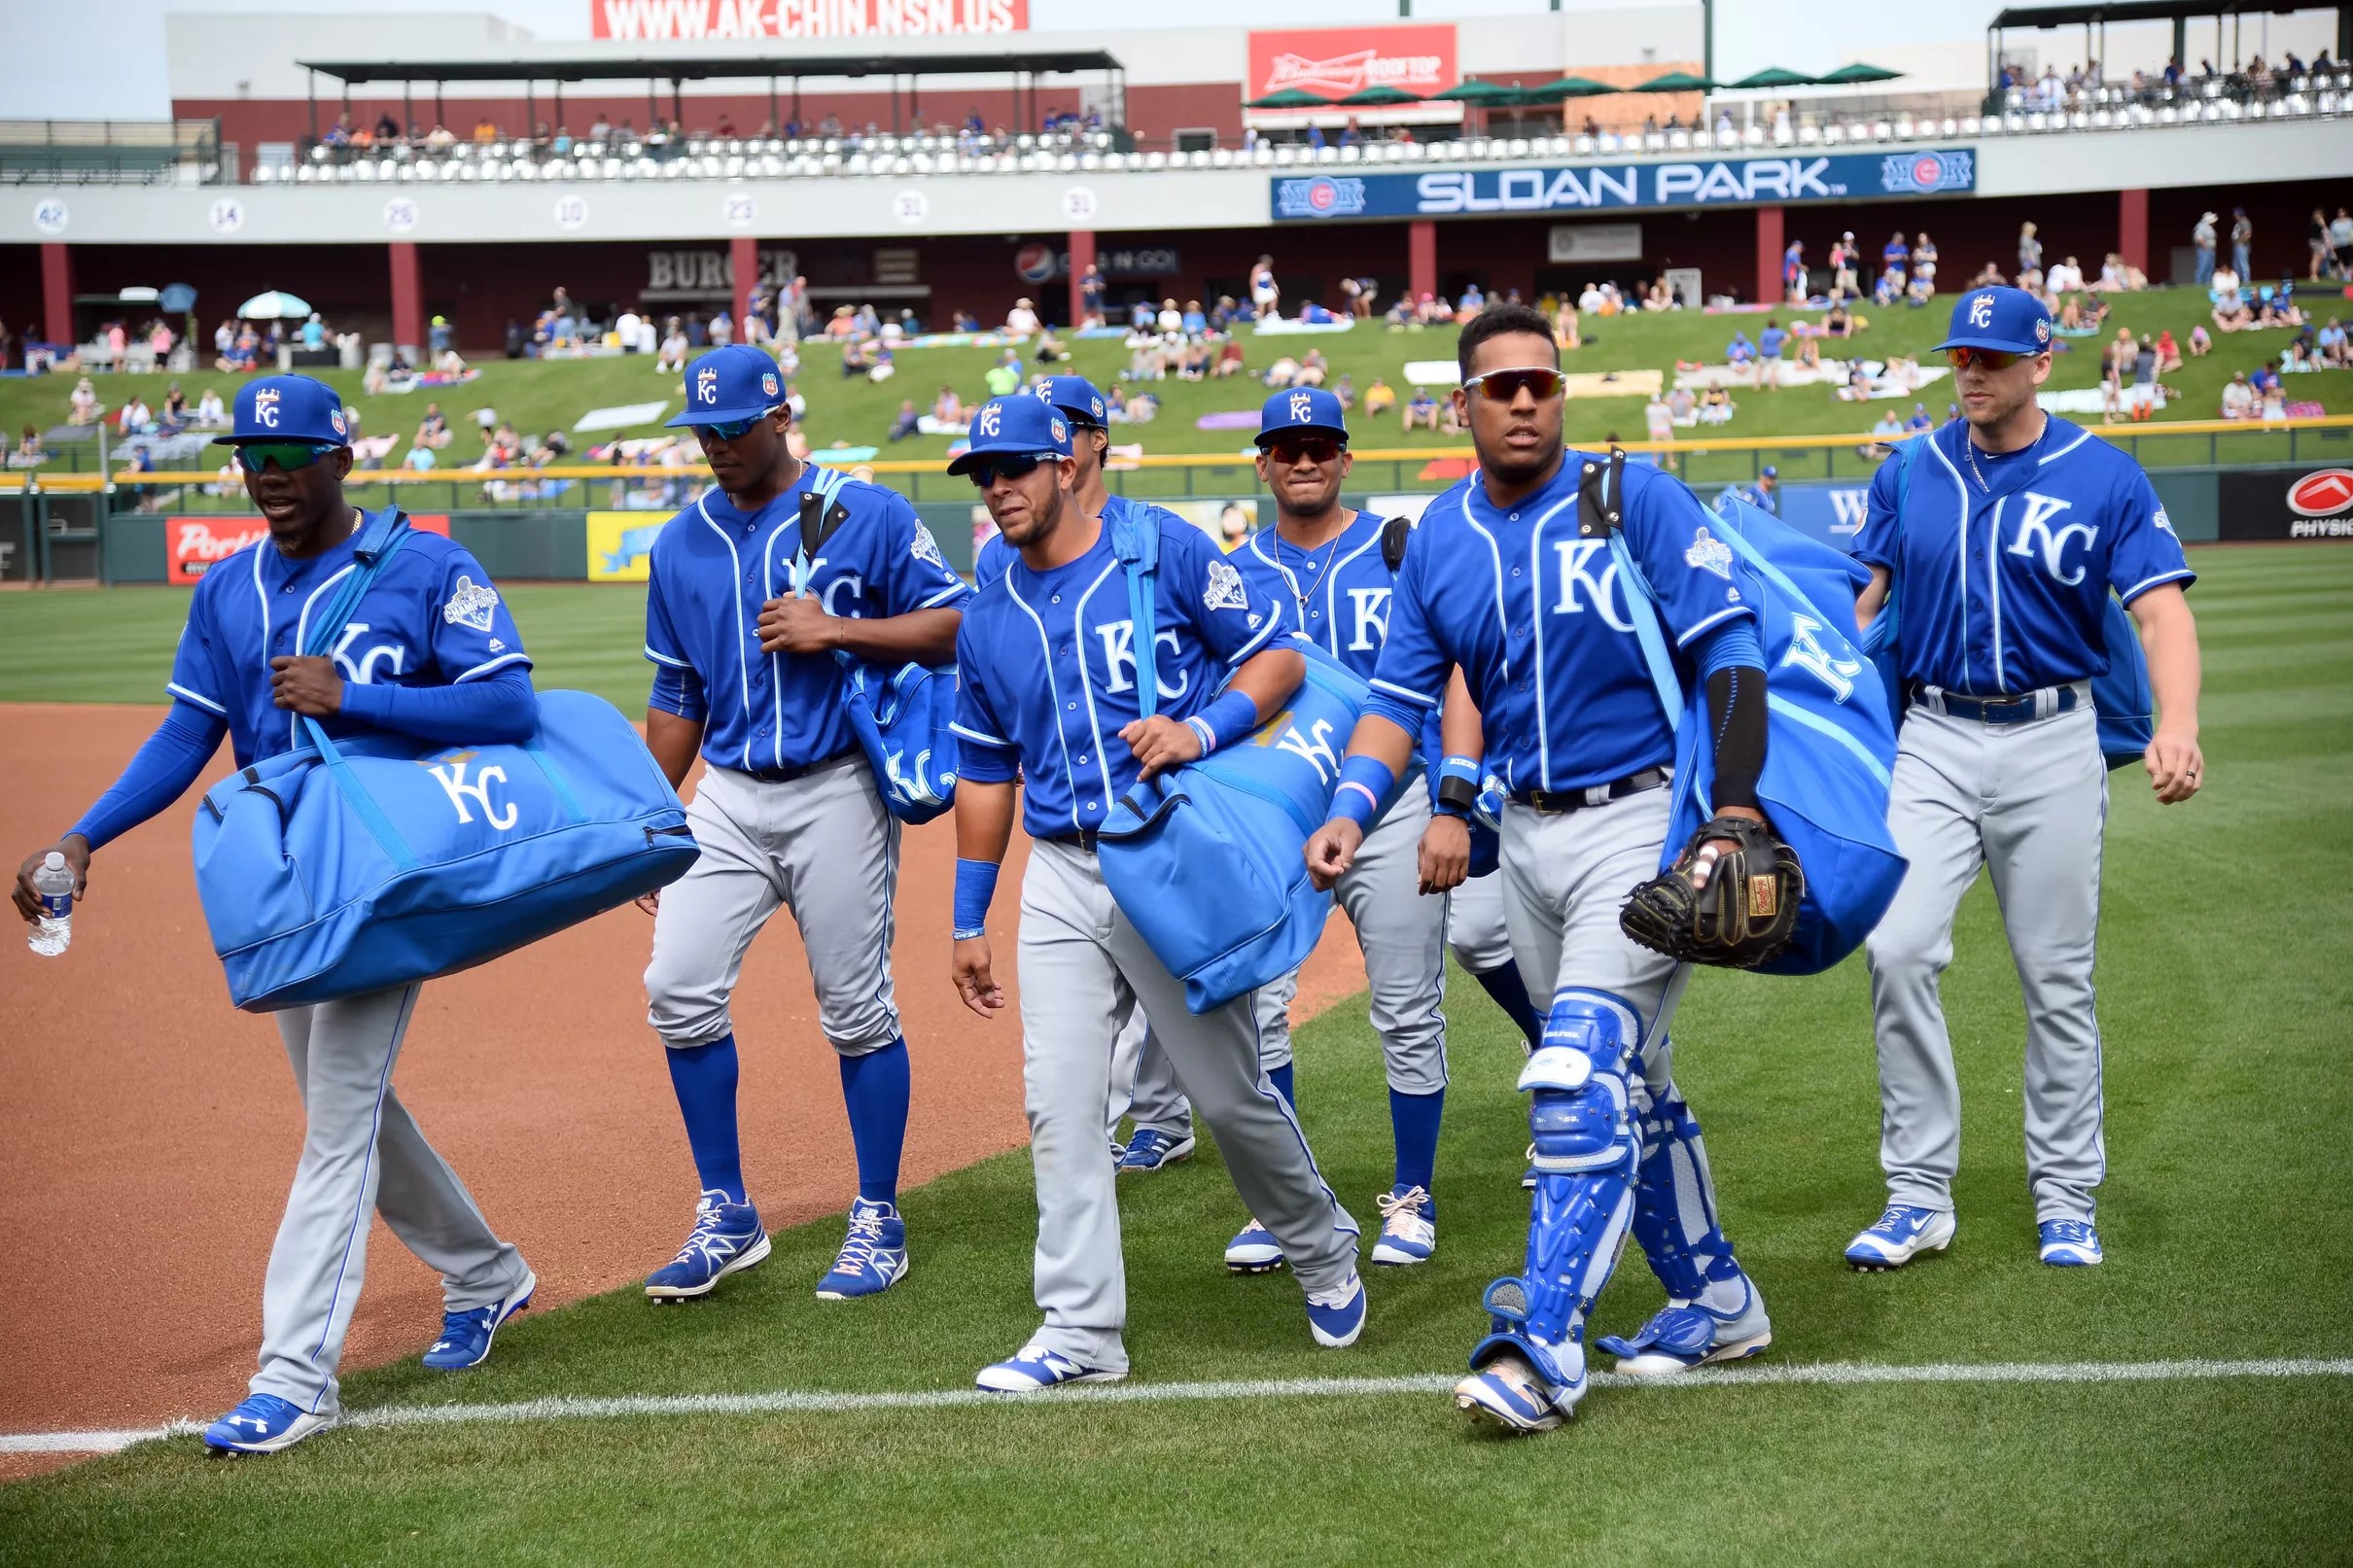 Here is your Royals spring training roster